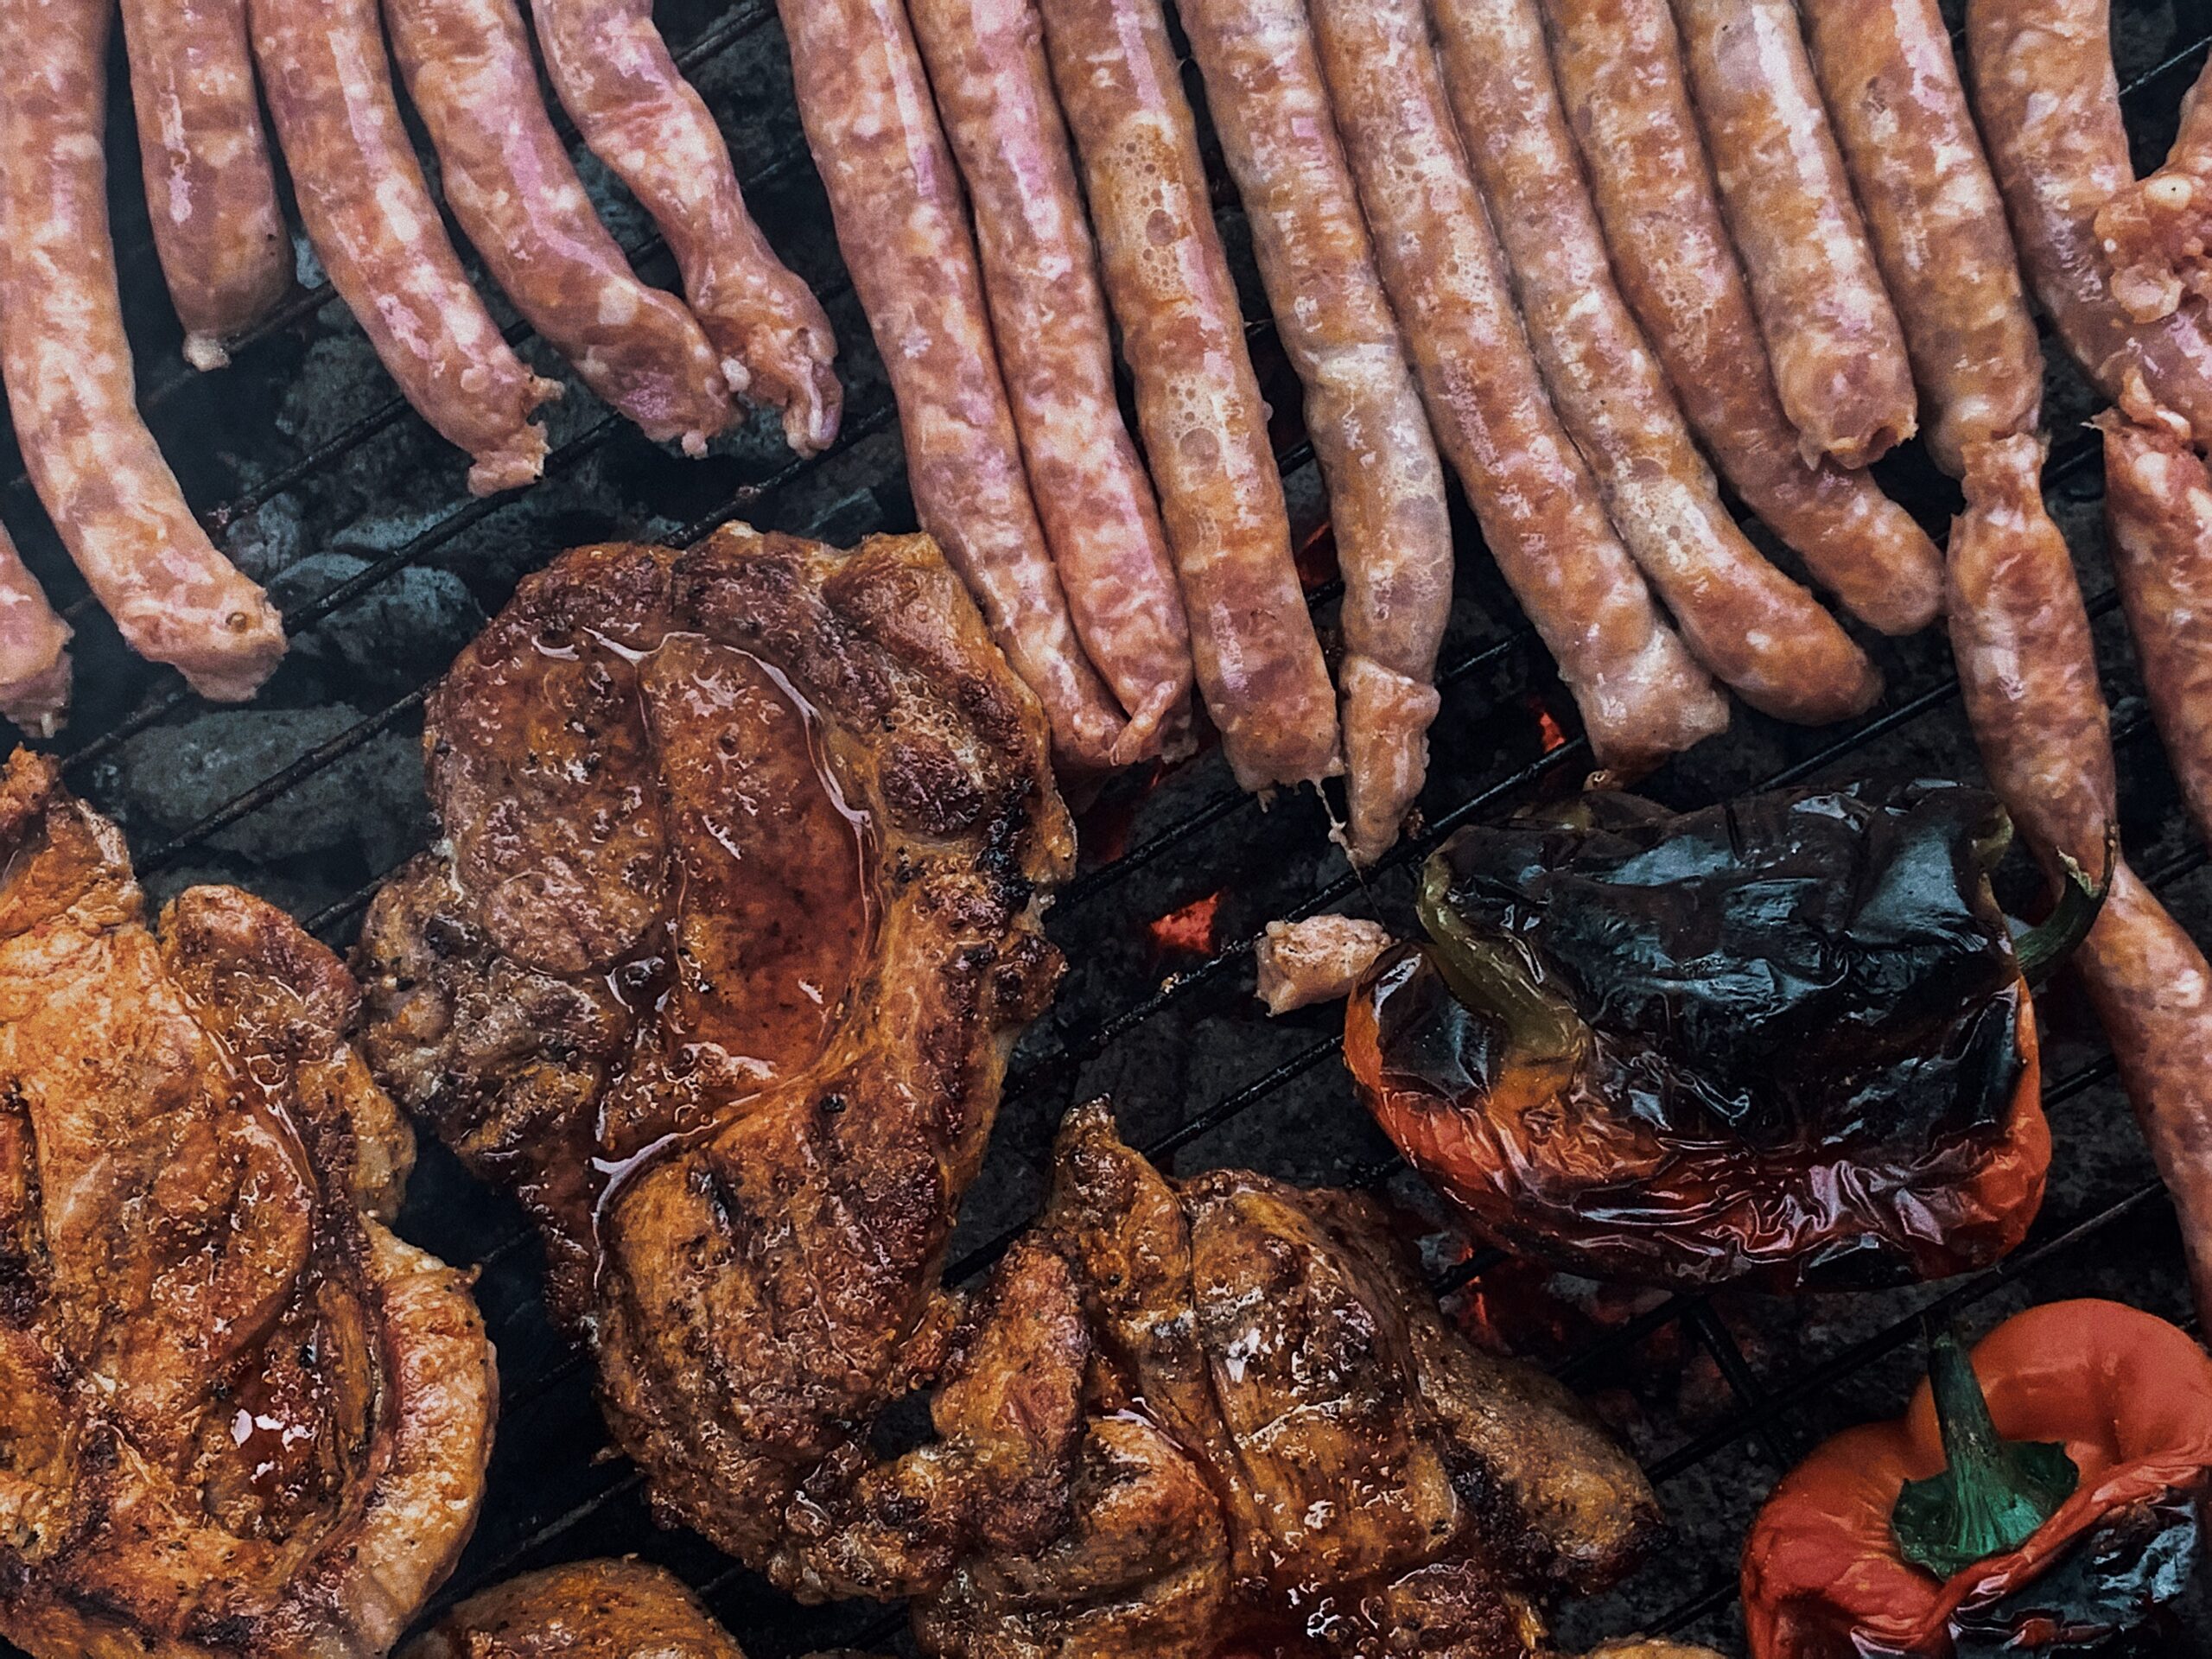 Eating too many processed meats like sausage can increase the risk of cancer and early death.